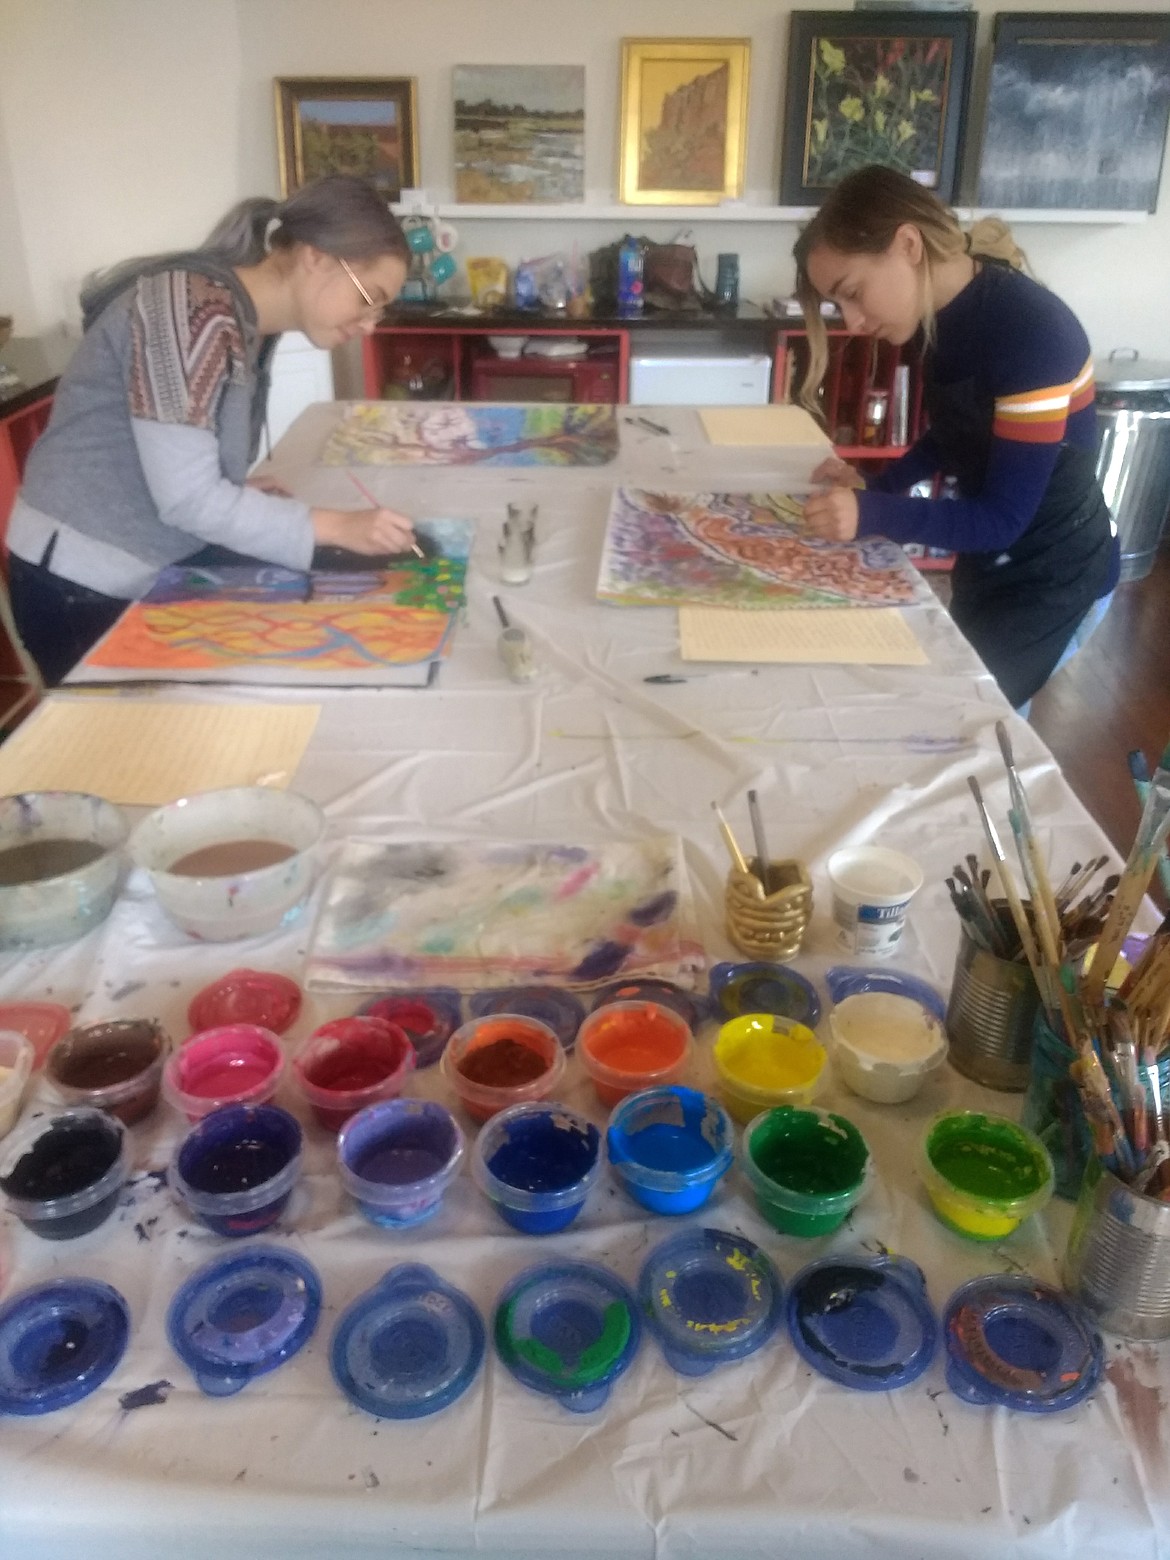 Students Andrea Johnson, left, and Rachel Hughes paint during a mentee workshop in Redbrick Art Studio in November. Rachel is working with Redbrick artist Chelsea Cordova to implement a new arts program at Venture High School. (Courtesy photo)